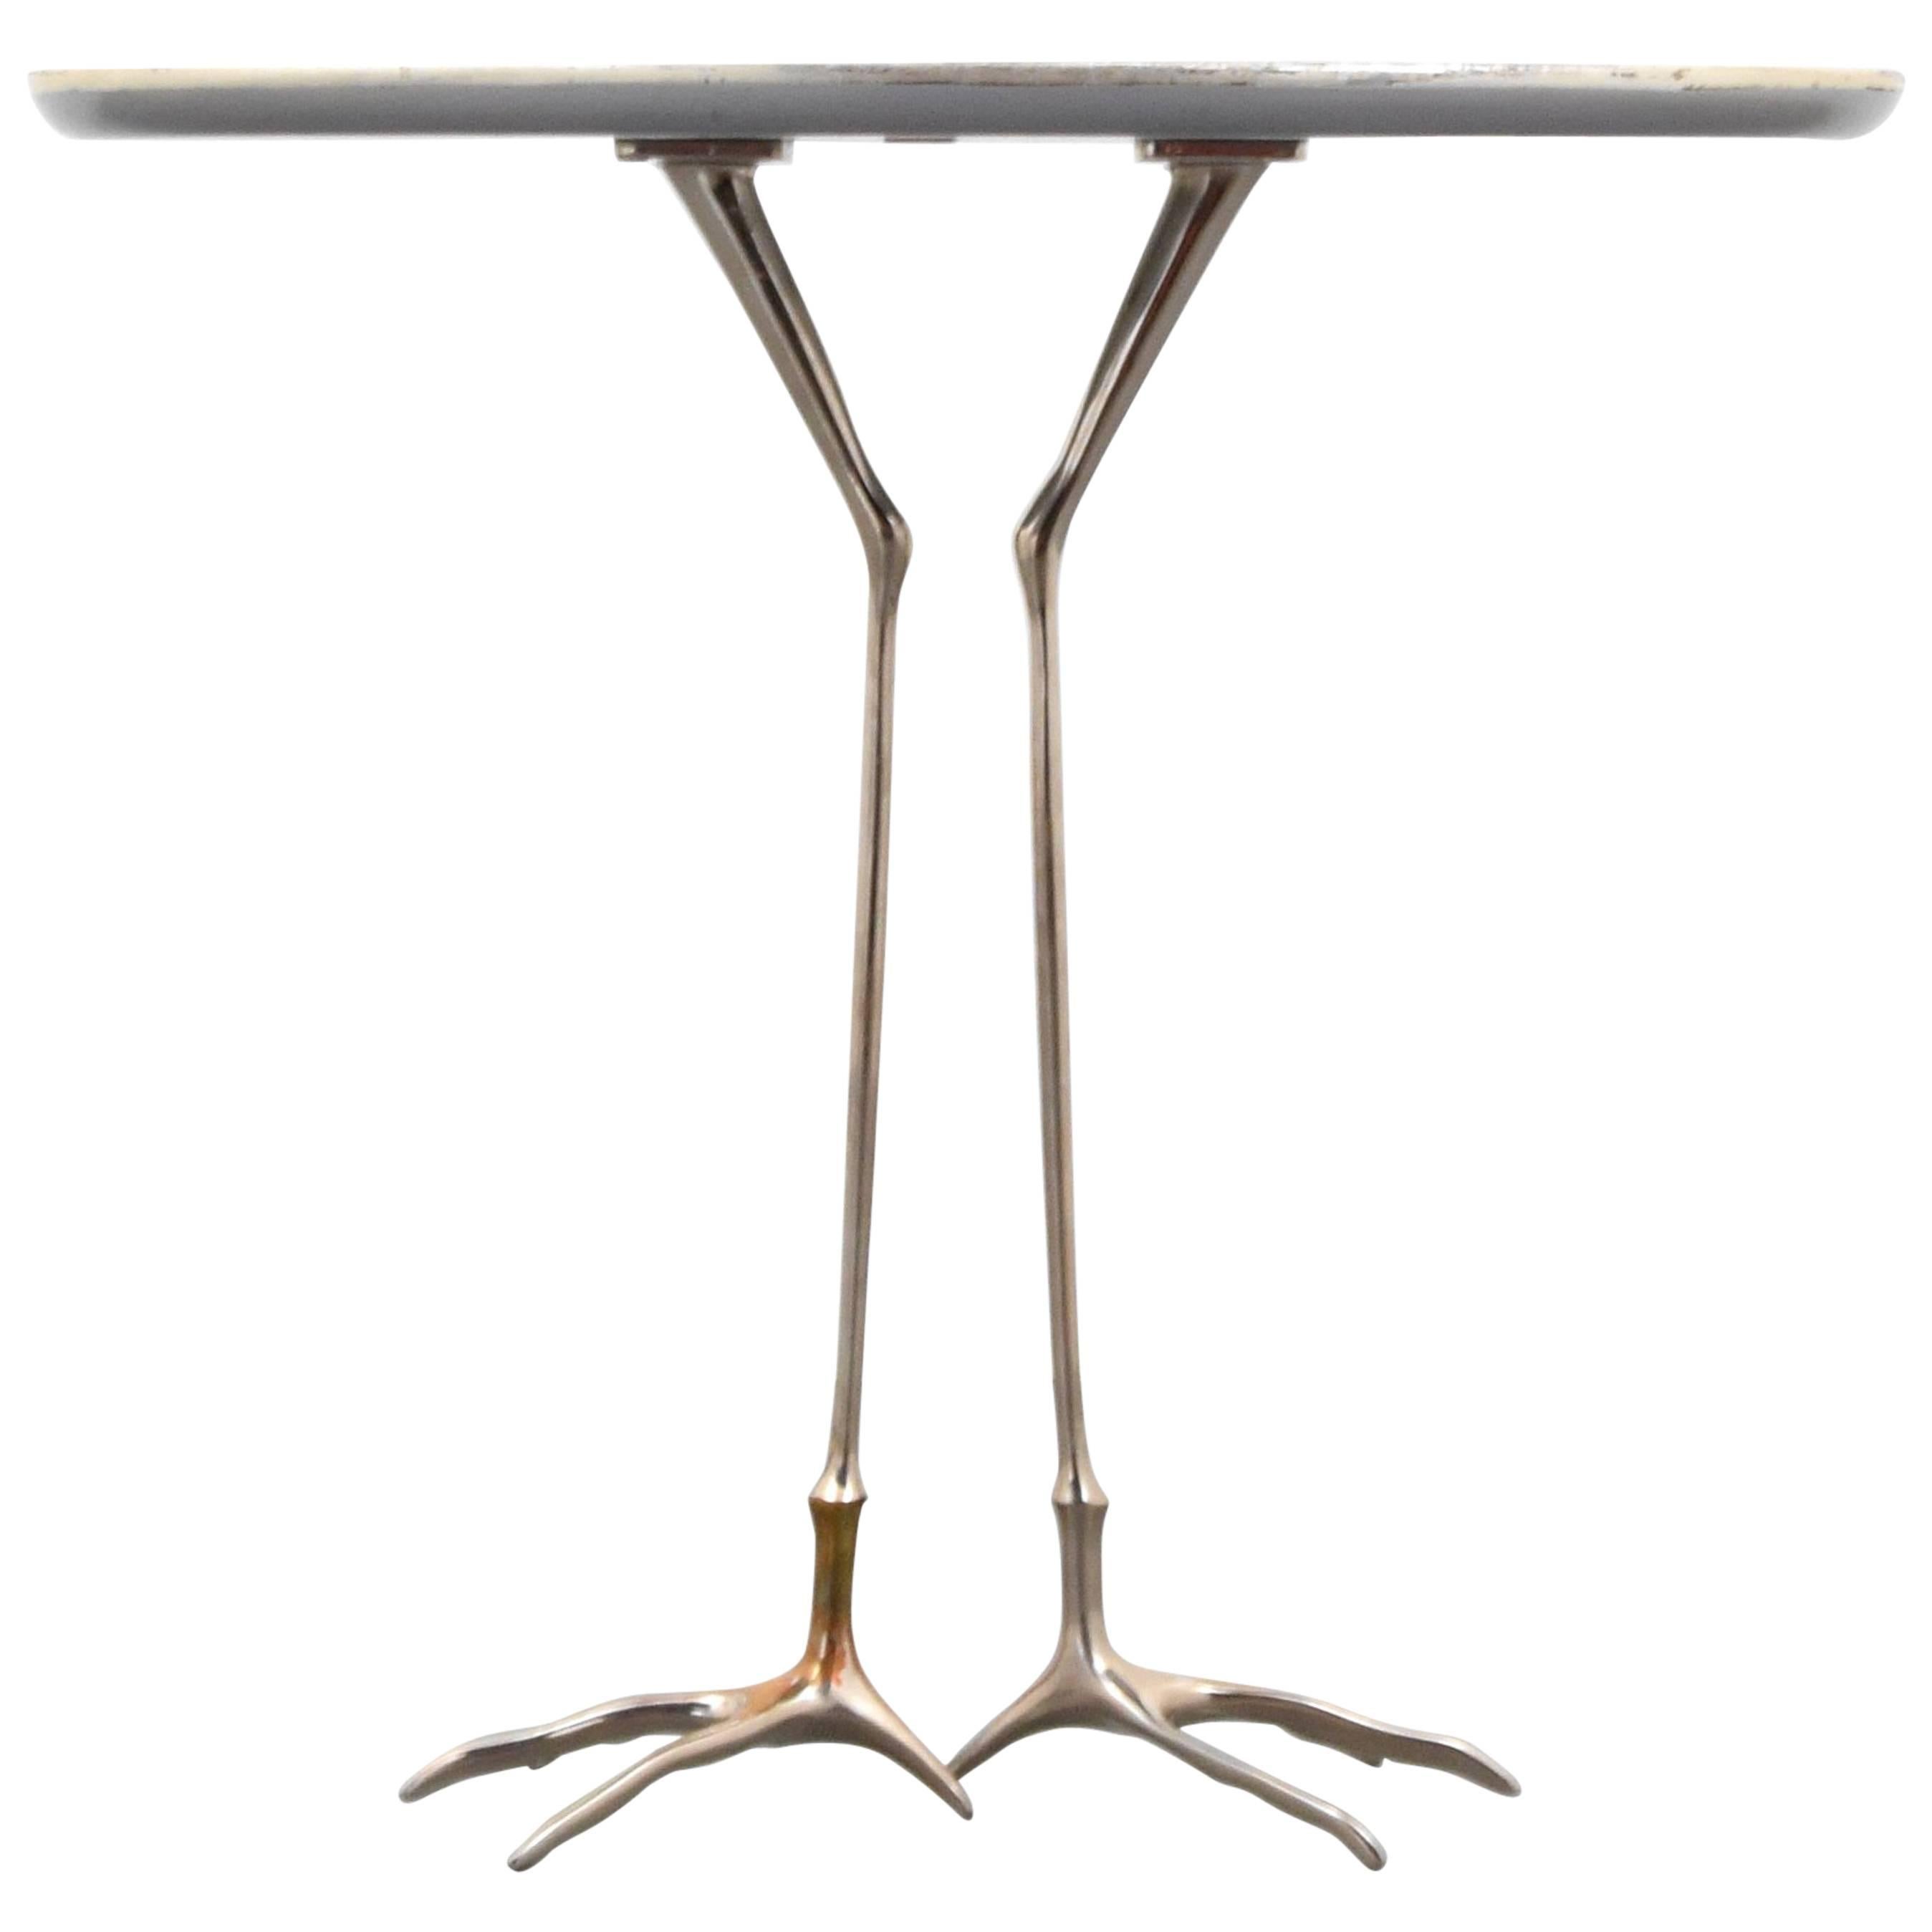 Meret Oppenheim "Traccia" Table For Sale